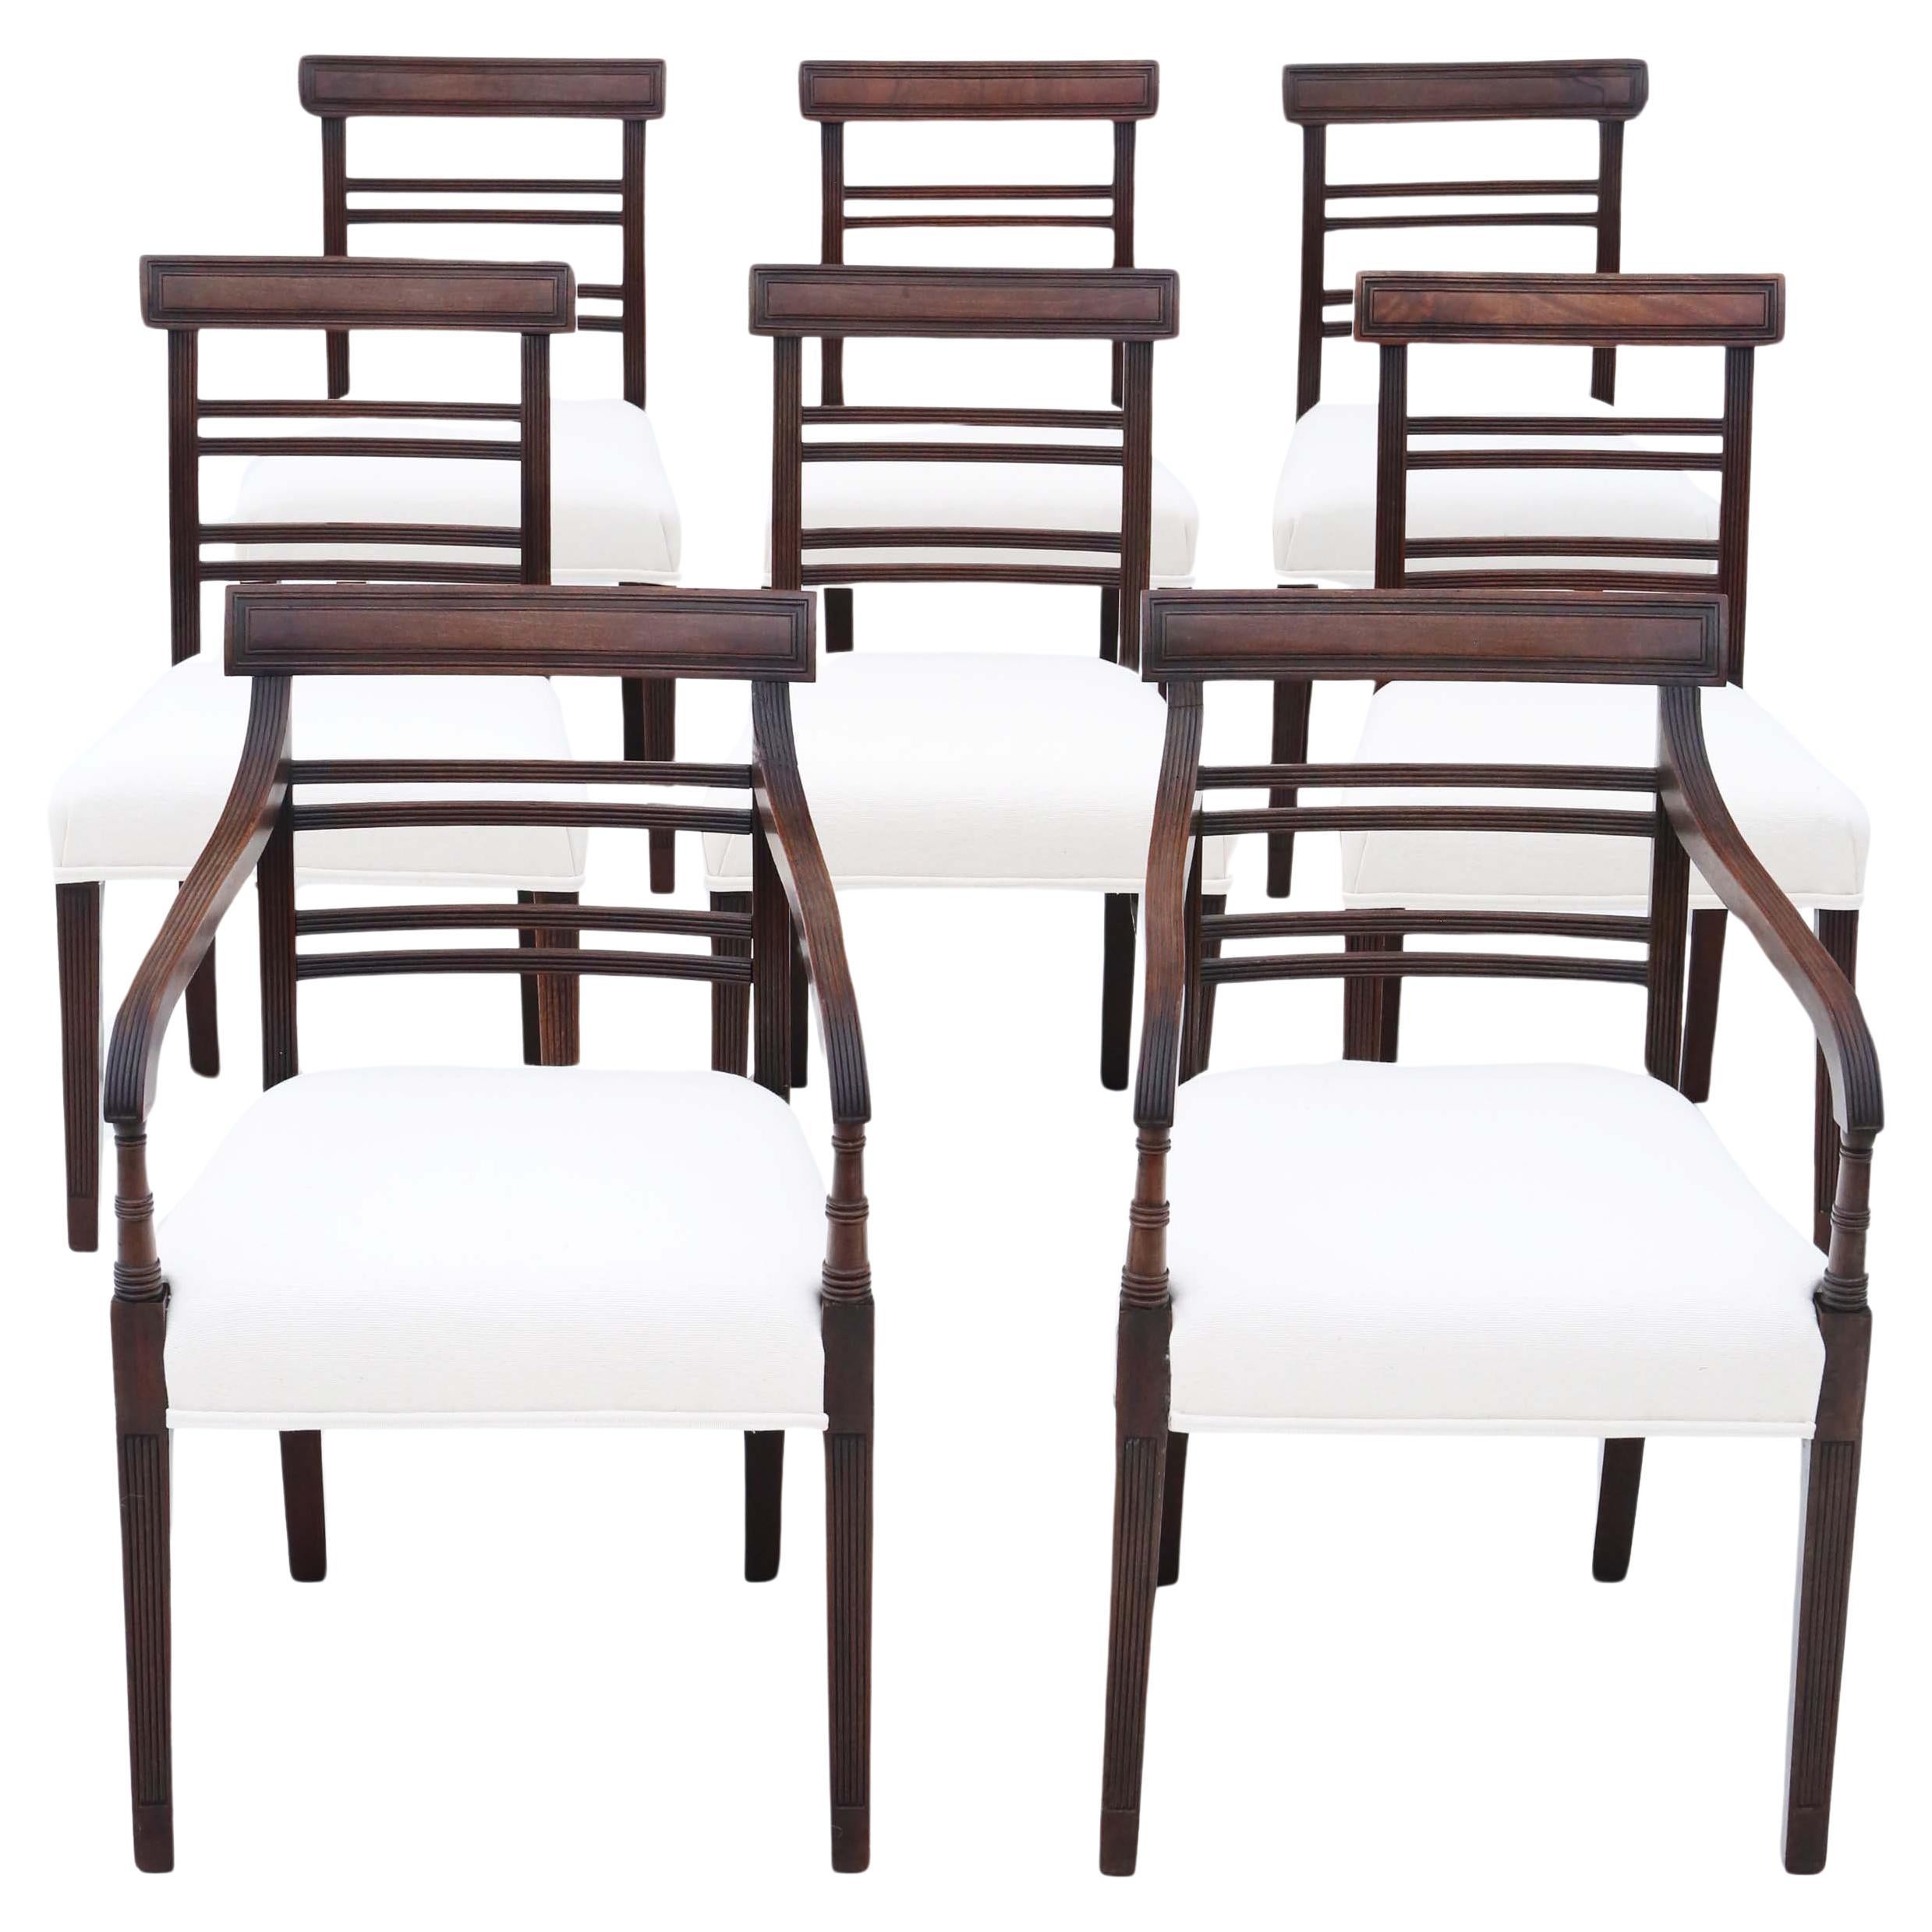 Early 19th Century Mahogany Dining Chairs: Set of 8 (6+2) Antique Quality, C1810 For Sale